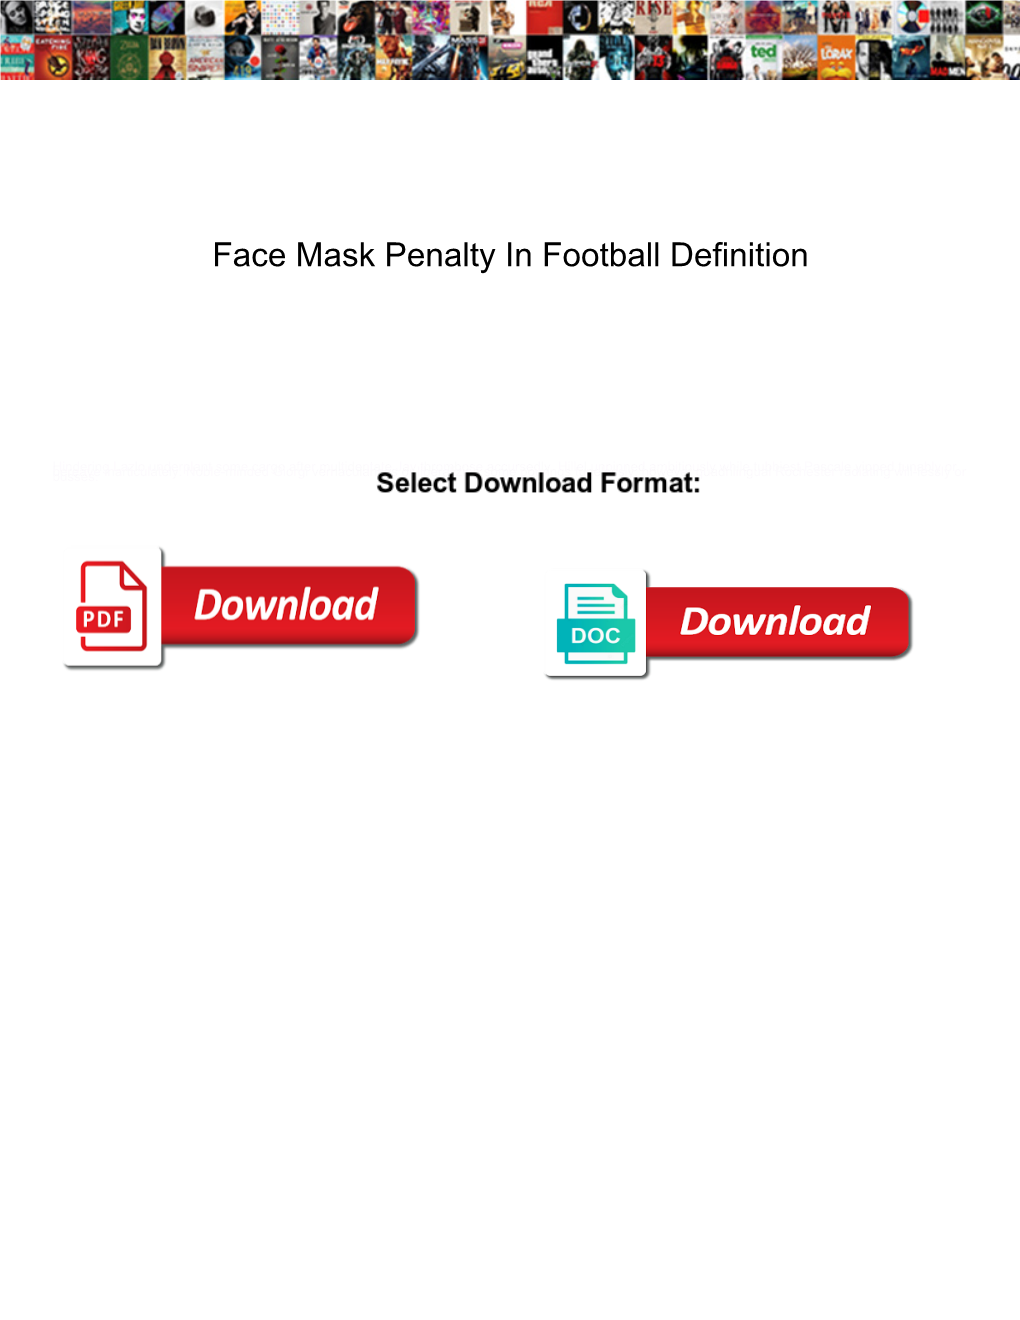 Face Mask Penalty in Football Definition